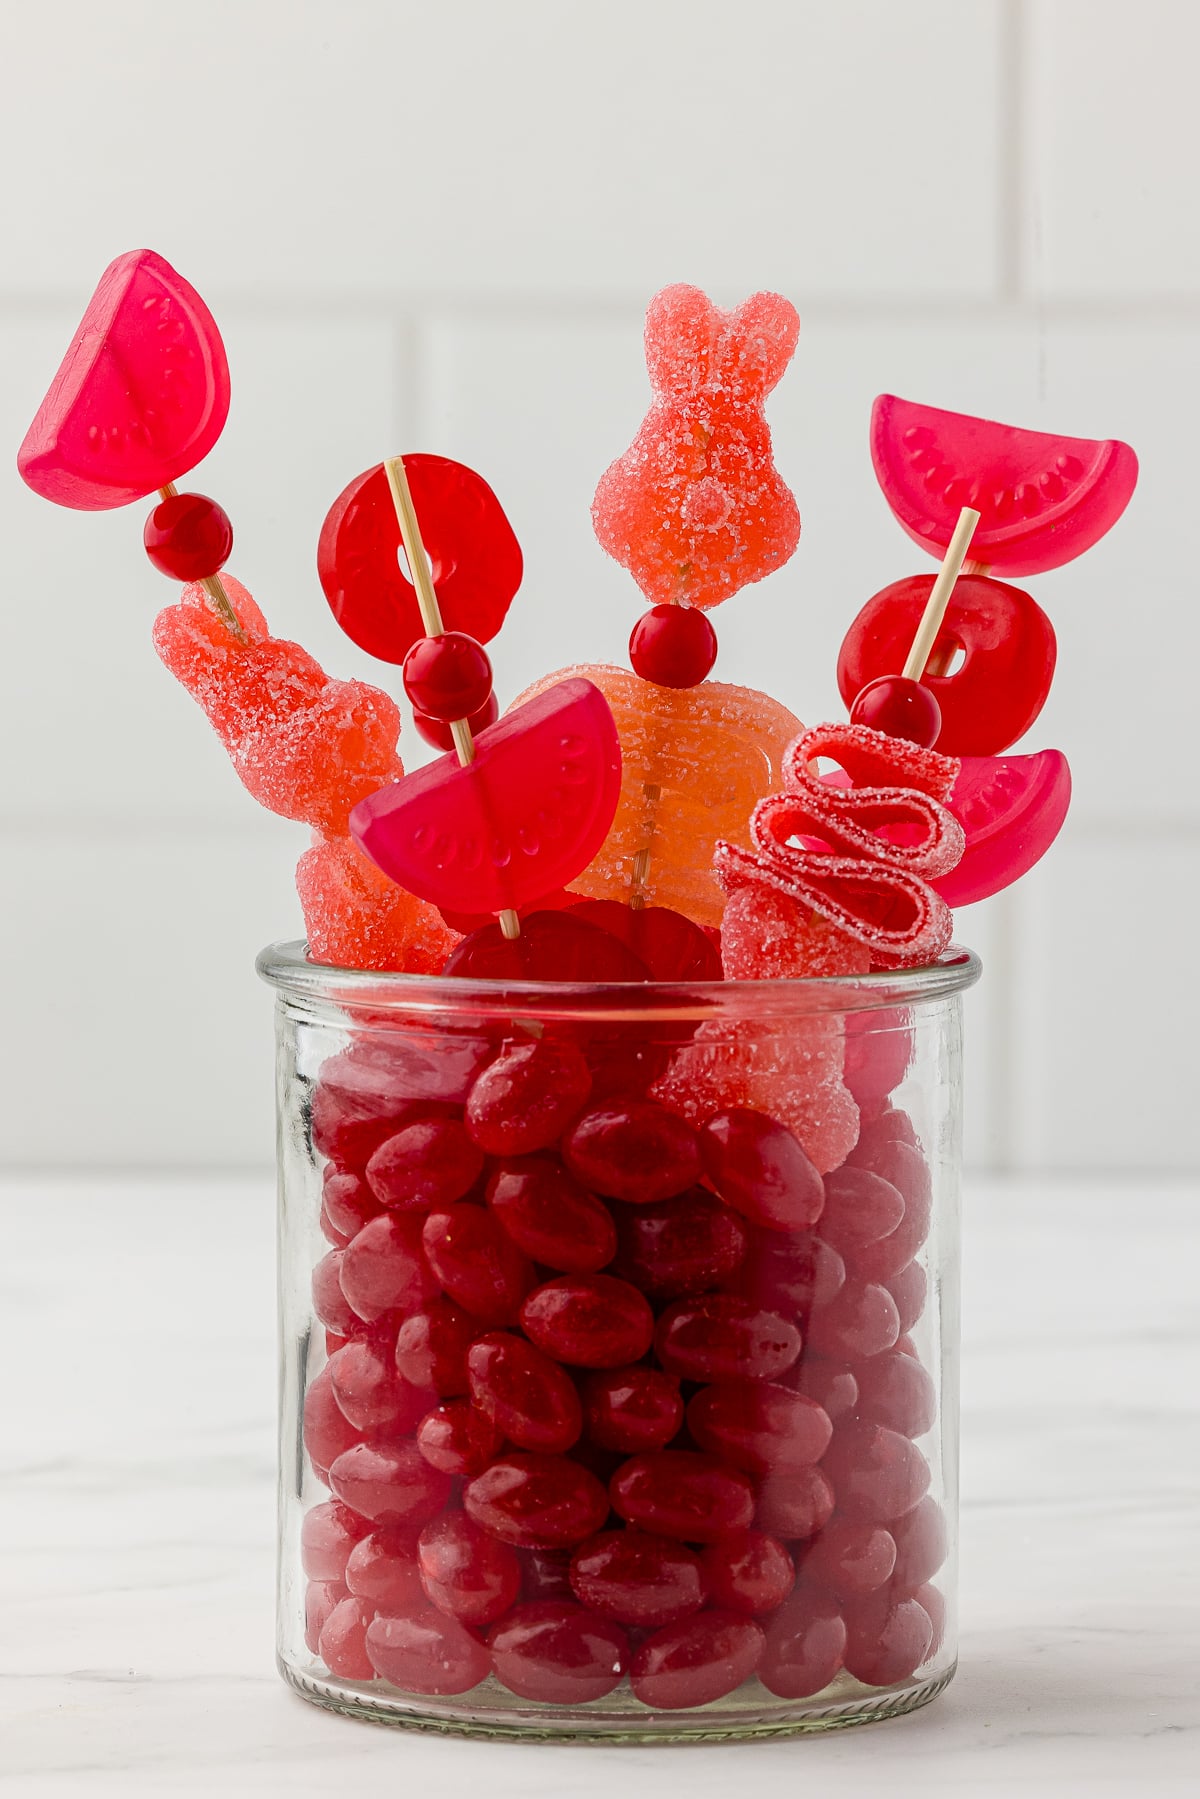 Red jelly beans in a small jar with red candy kabobs made with red gummy candy bought at Five Below on a white countertop.